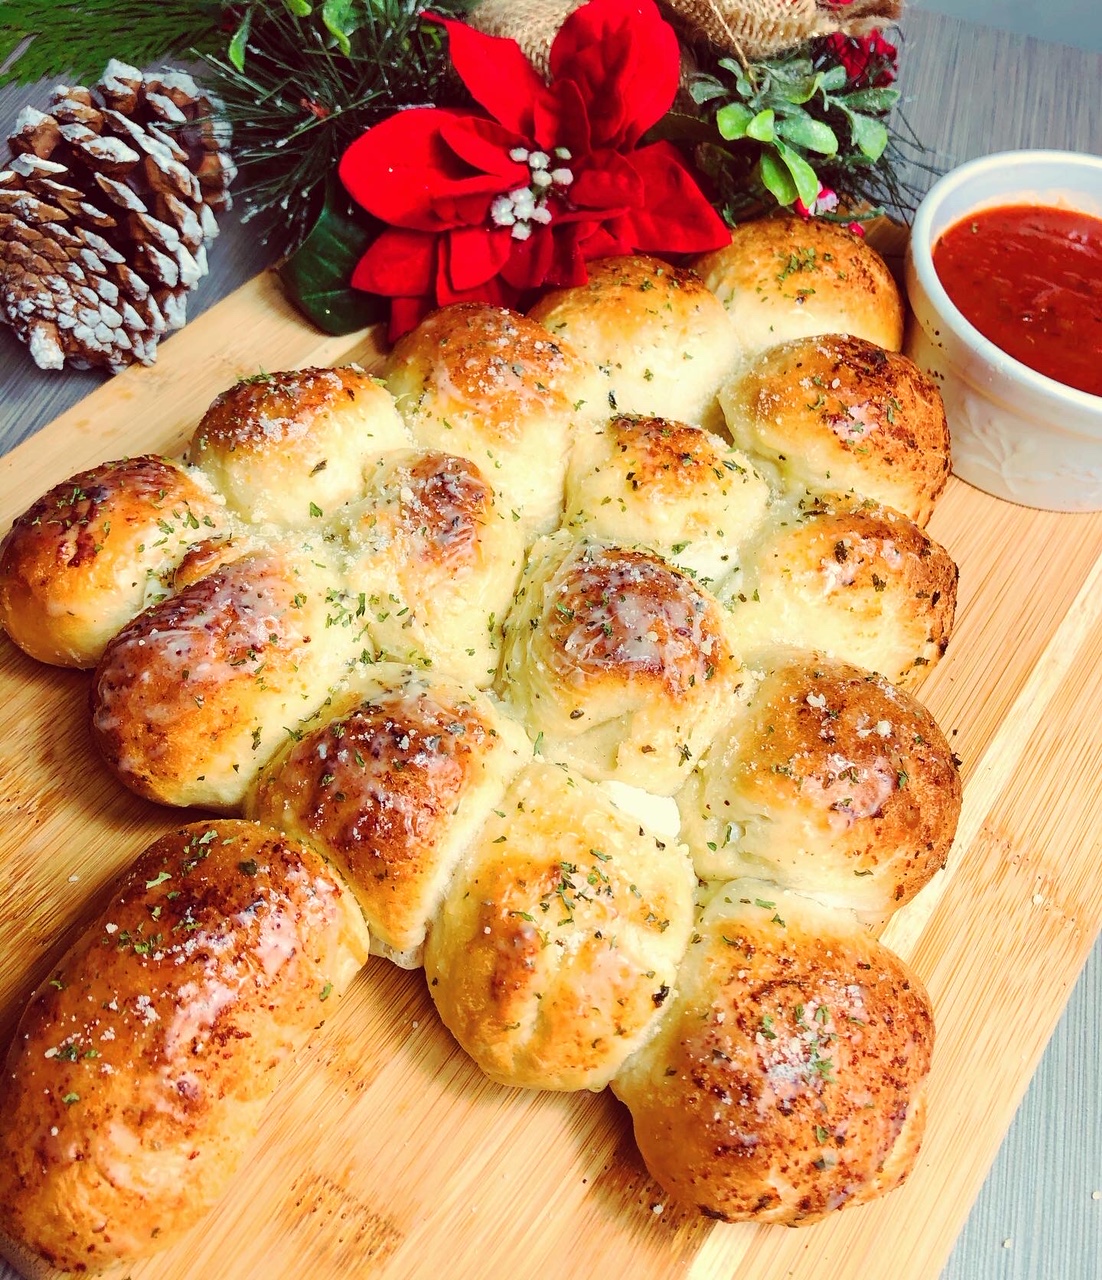 Mozzarella cheese stuffed bread, browned to perfection, shaped into a Christmas tree pyramid, brushed with garlic herb butter, served on a wooden cutting board accented with frosted pine cones and poinsettias.